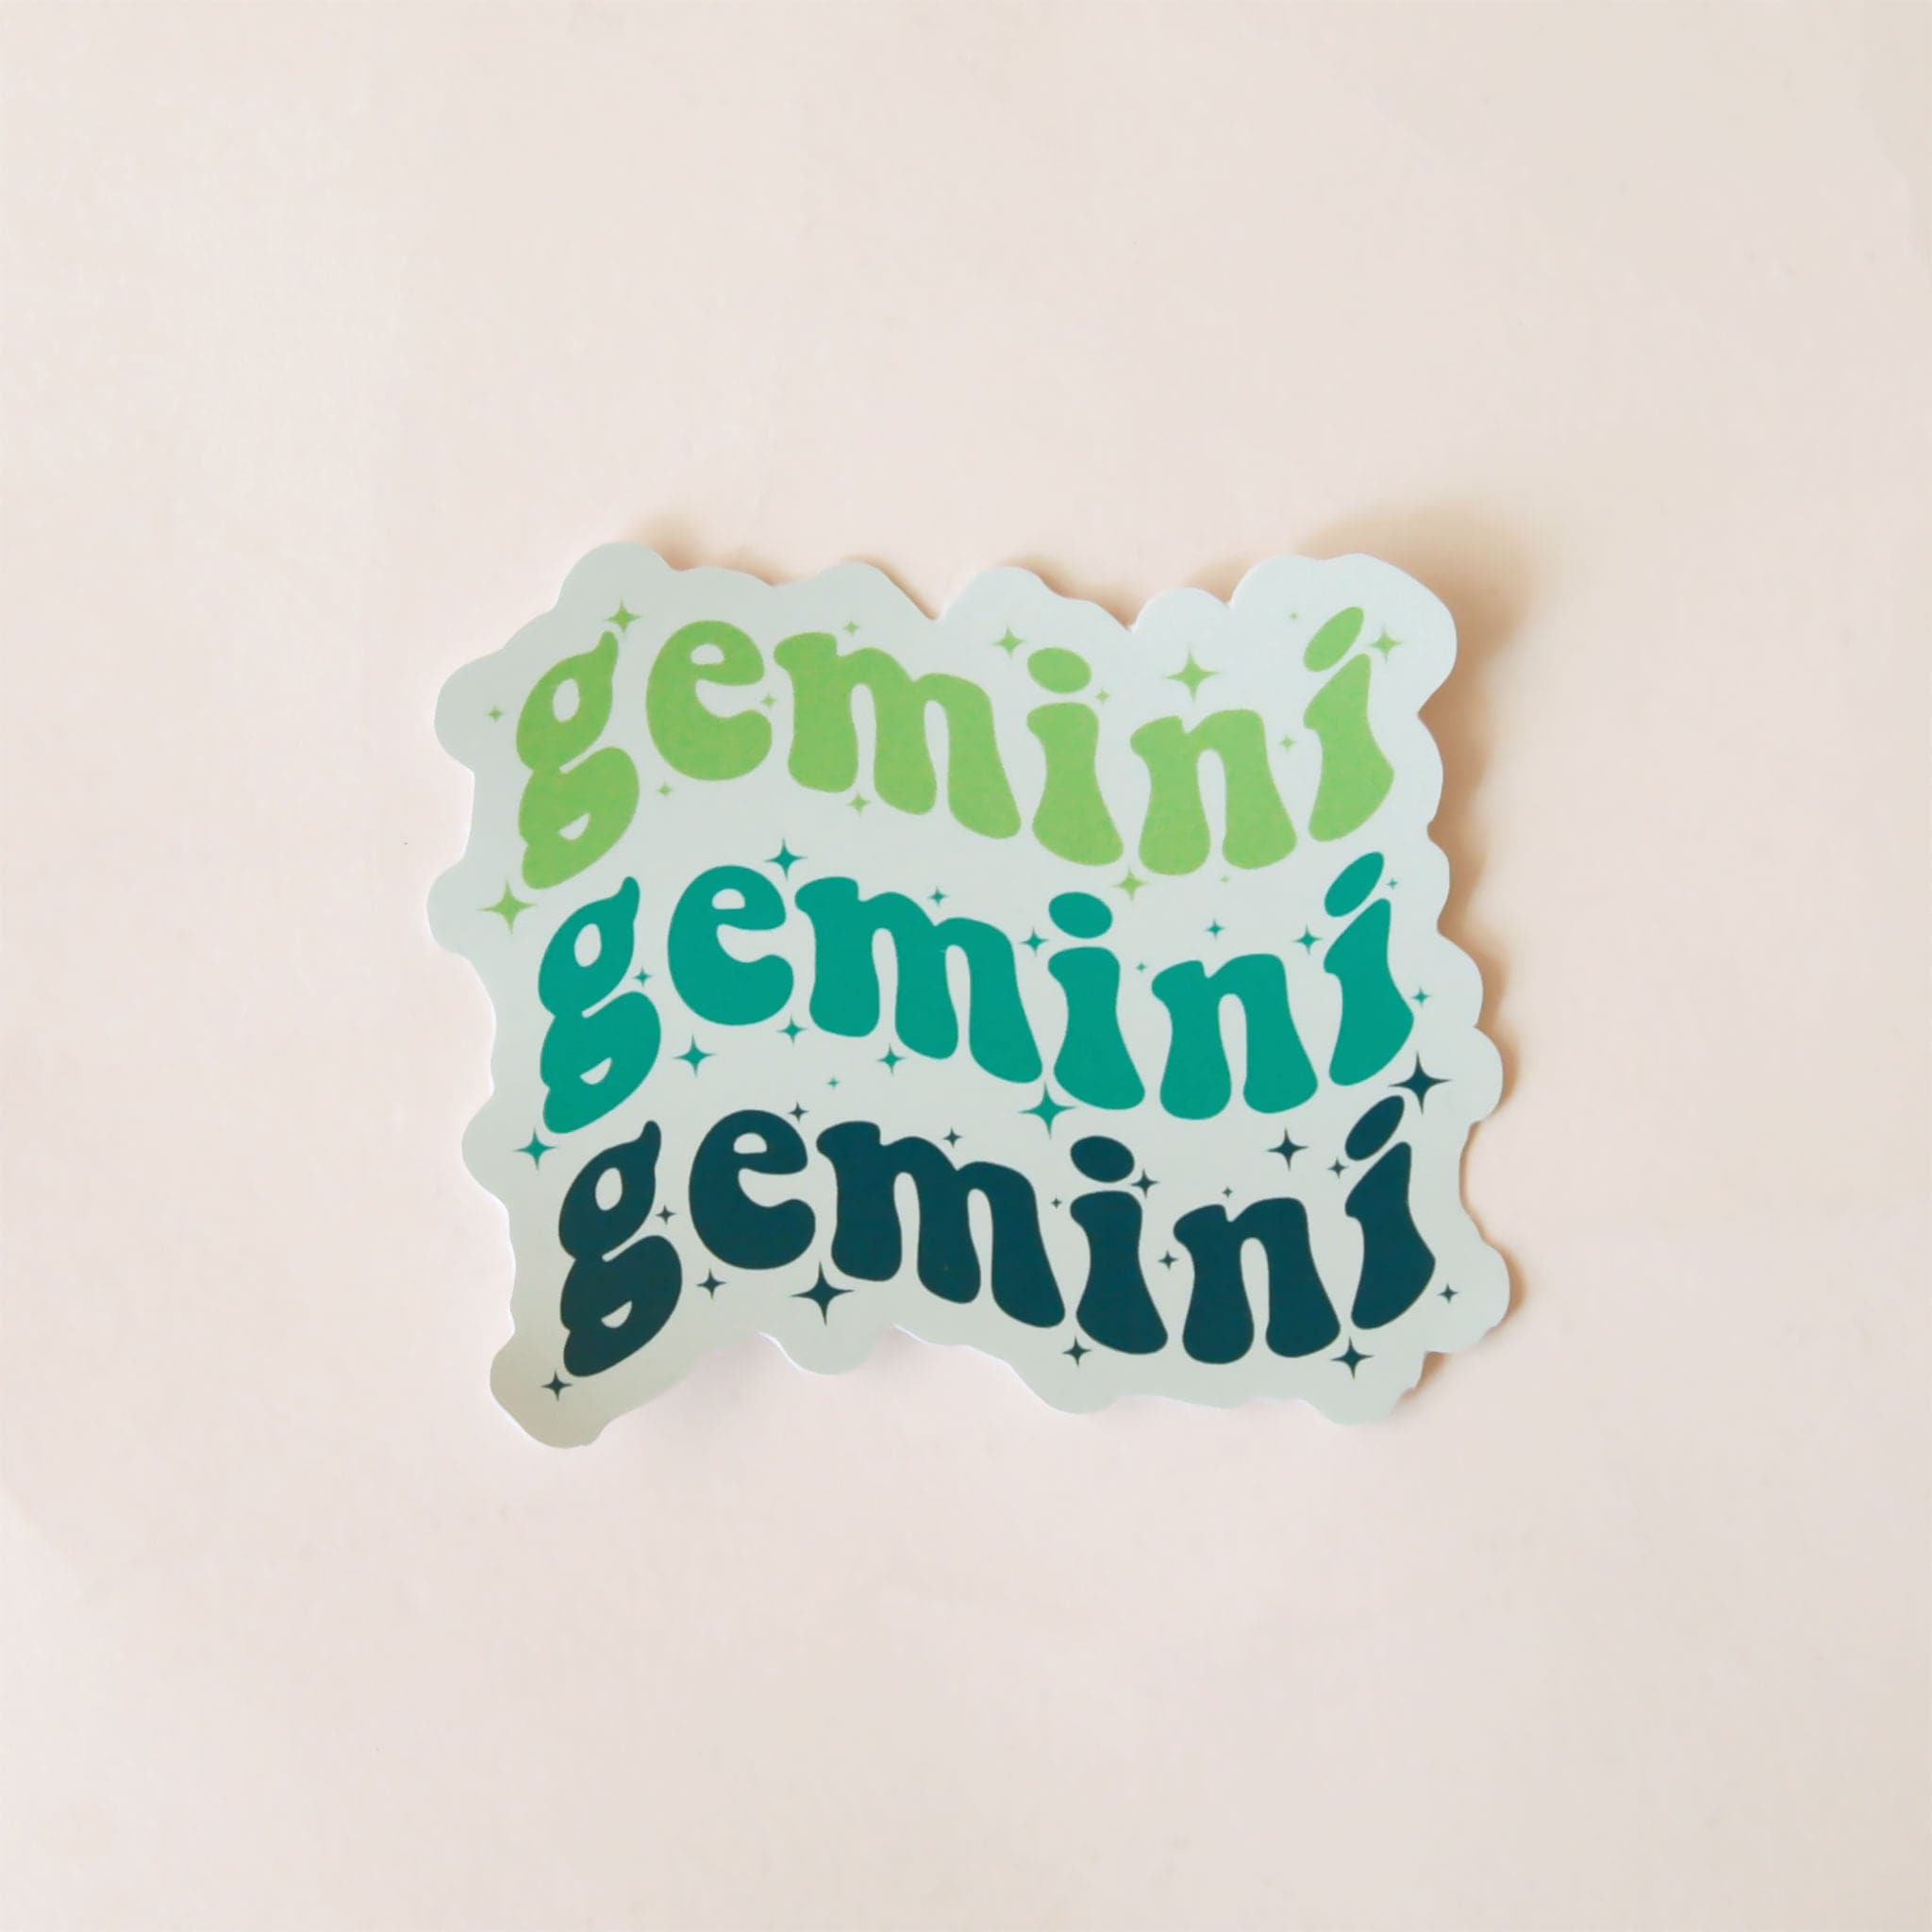 On a white background is a green sticker that has the word &quot;Gemini&quot; stacked on top of one another three times in a wavy design. 